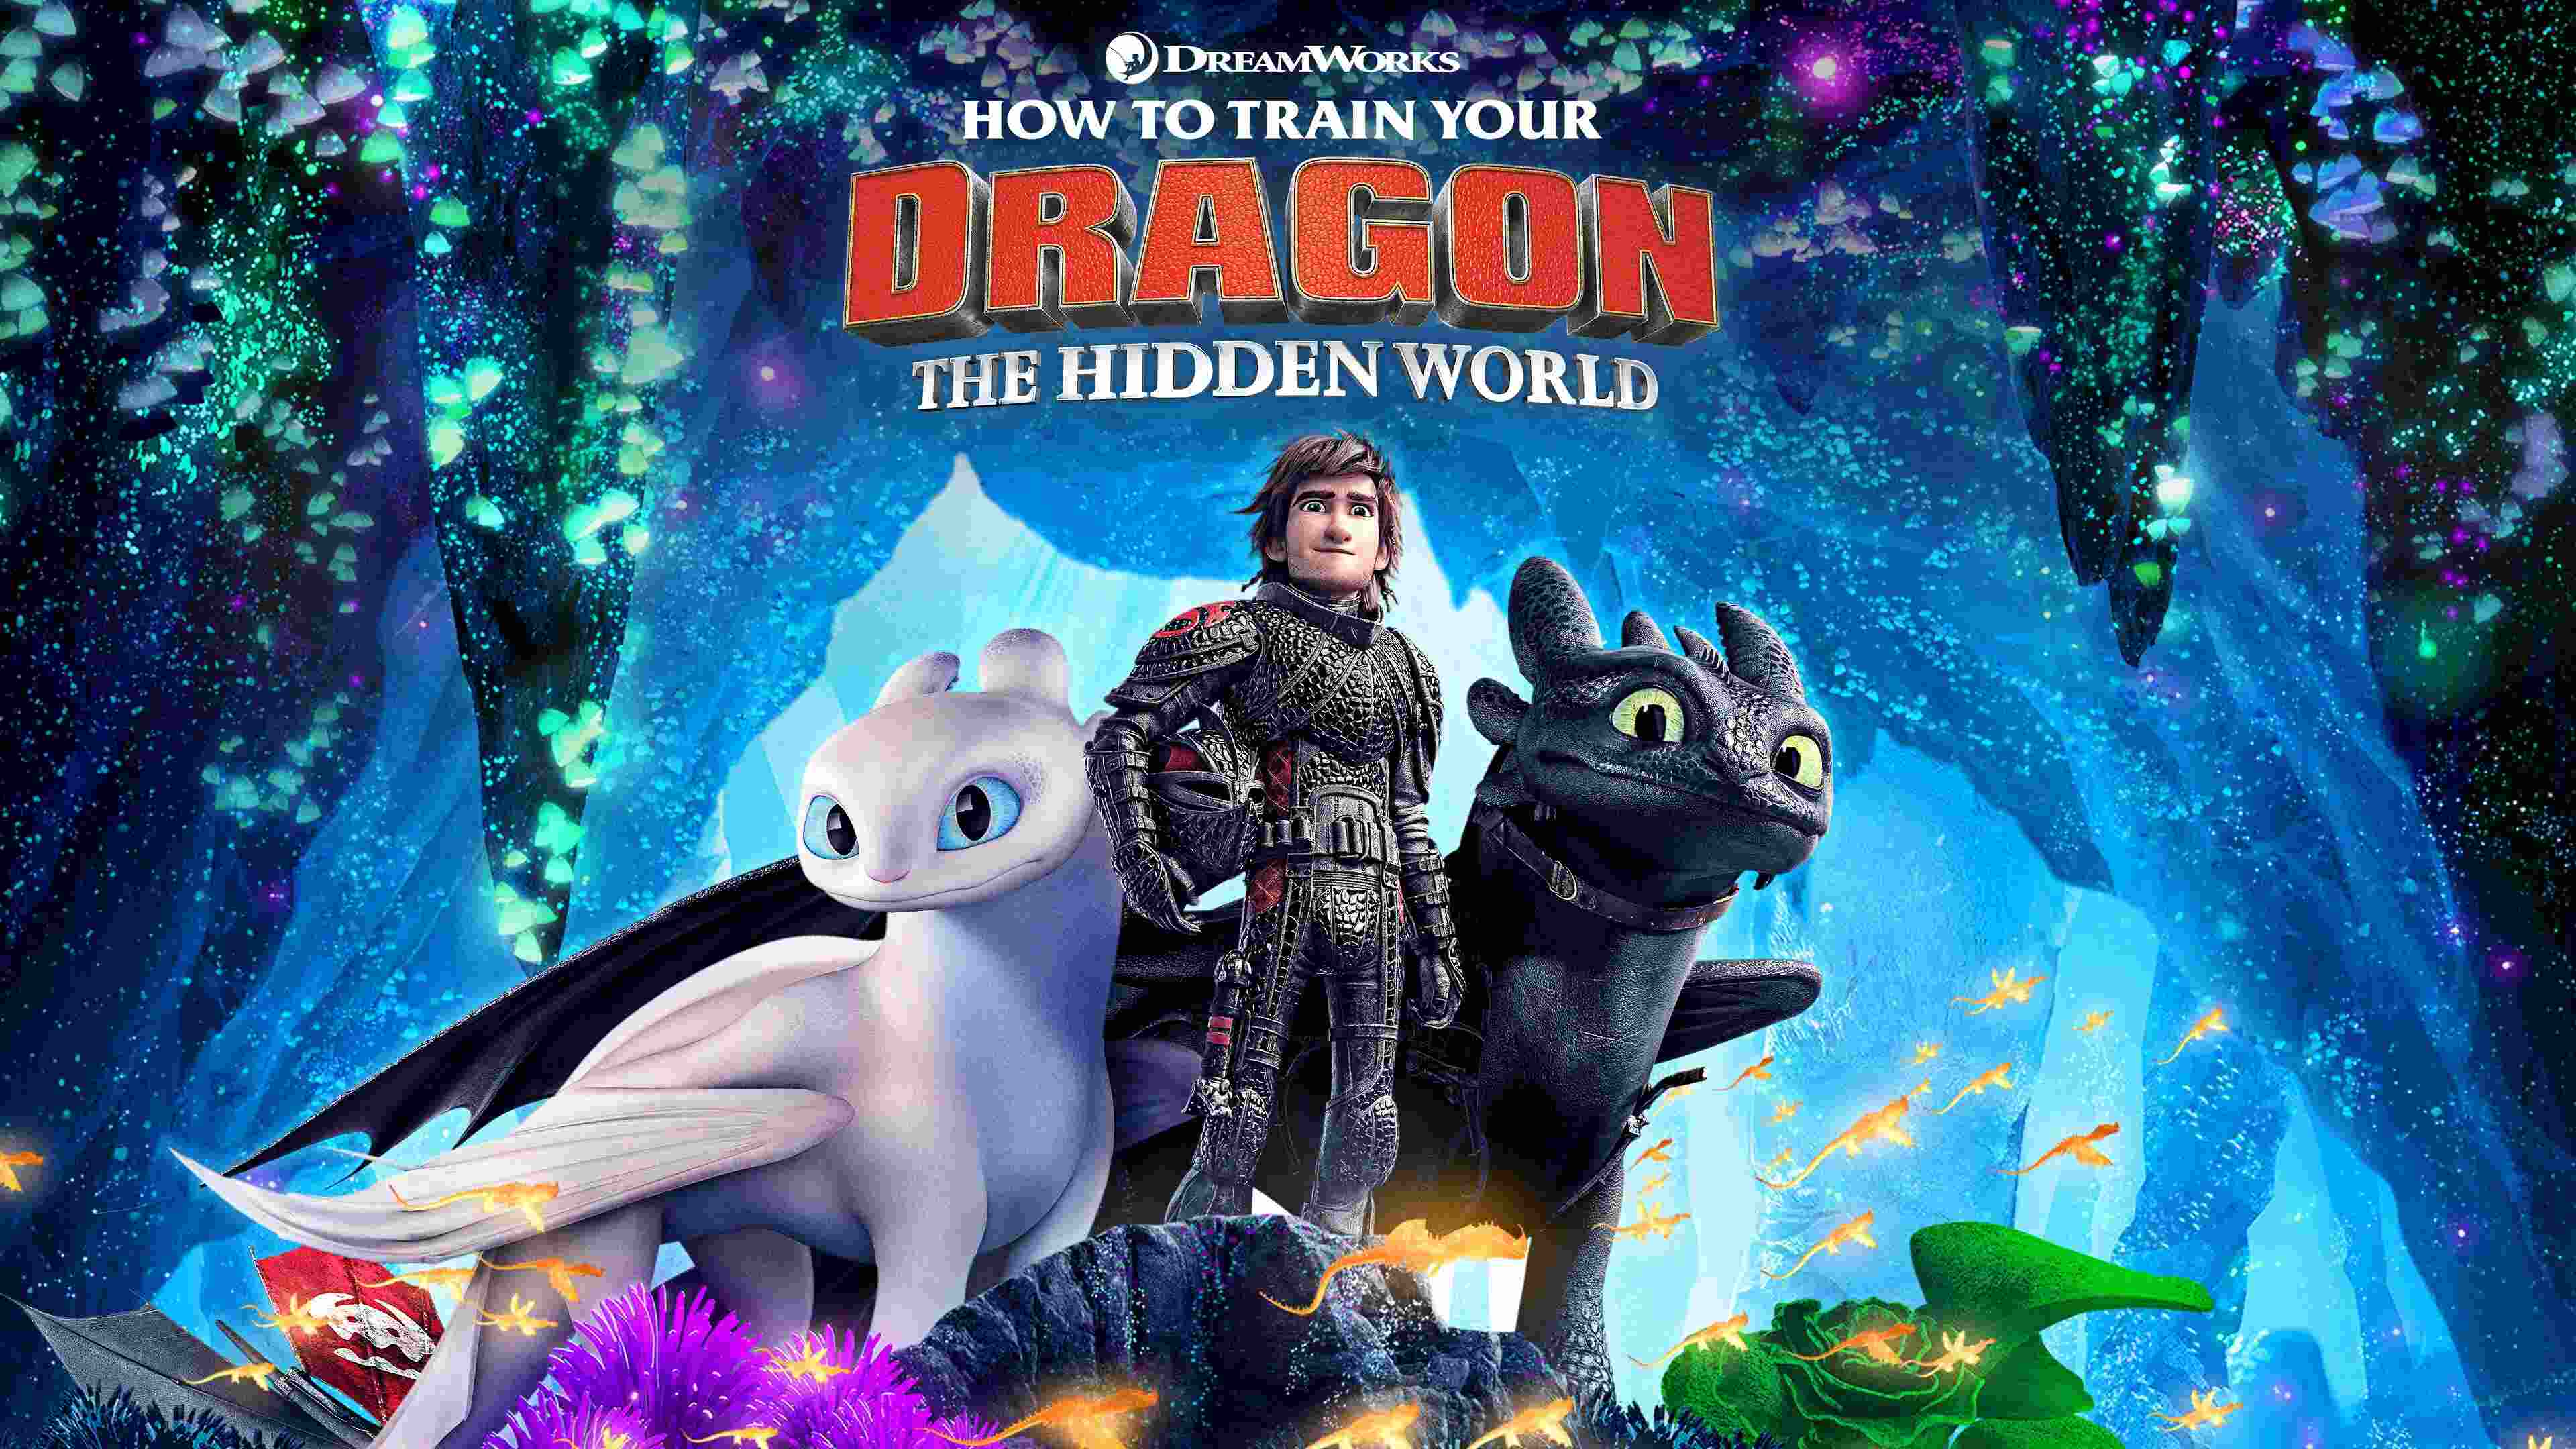 49-facts-about-the-movie-how-to-train-your-dragon-the-hidden-world